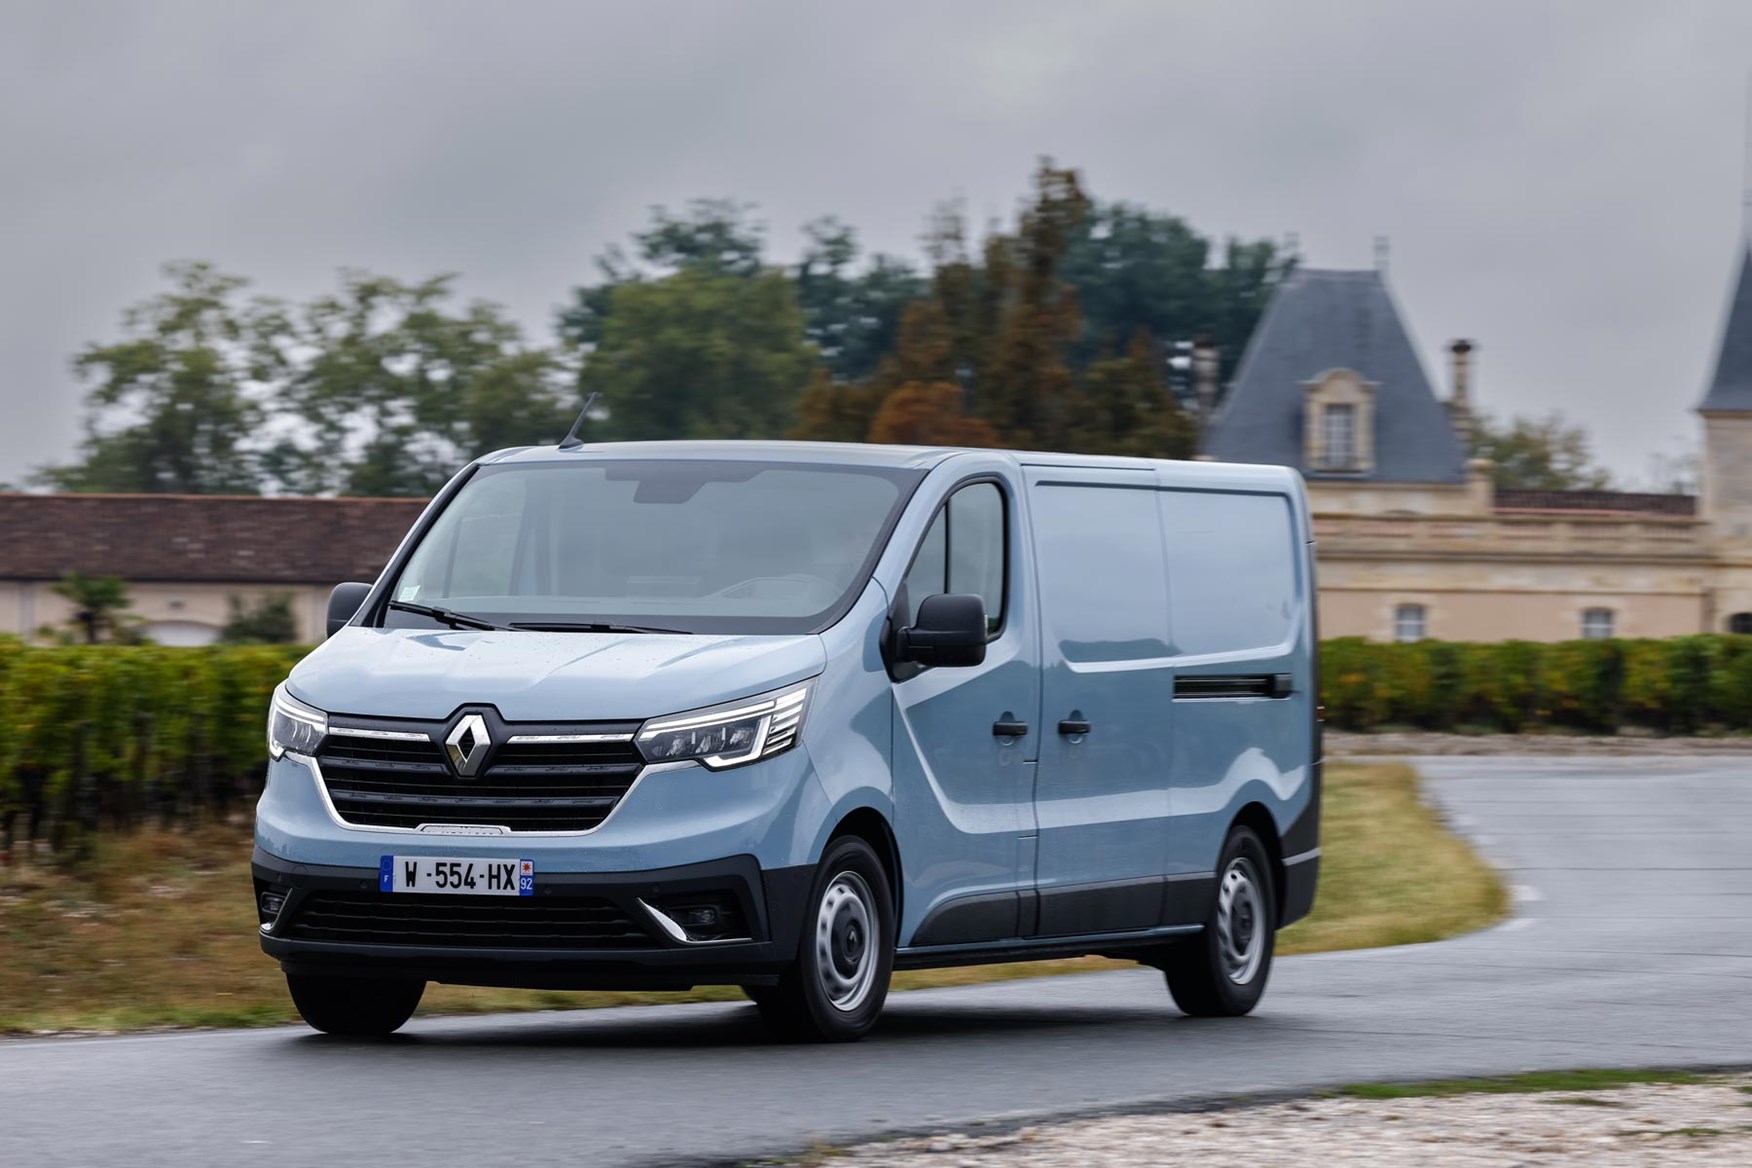 The Renault Trafic E-Tech completes the brand's electric line up.